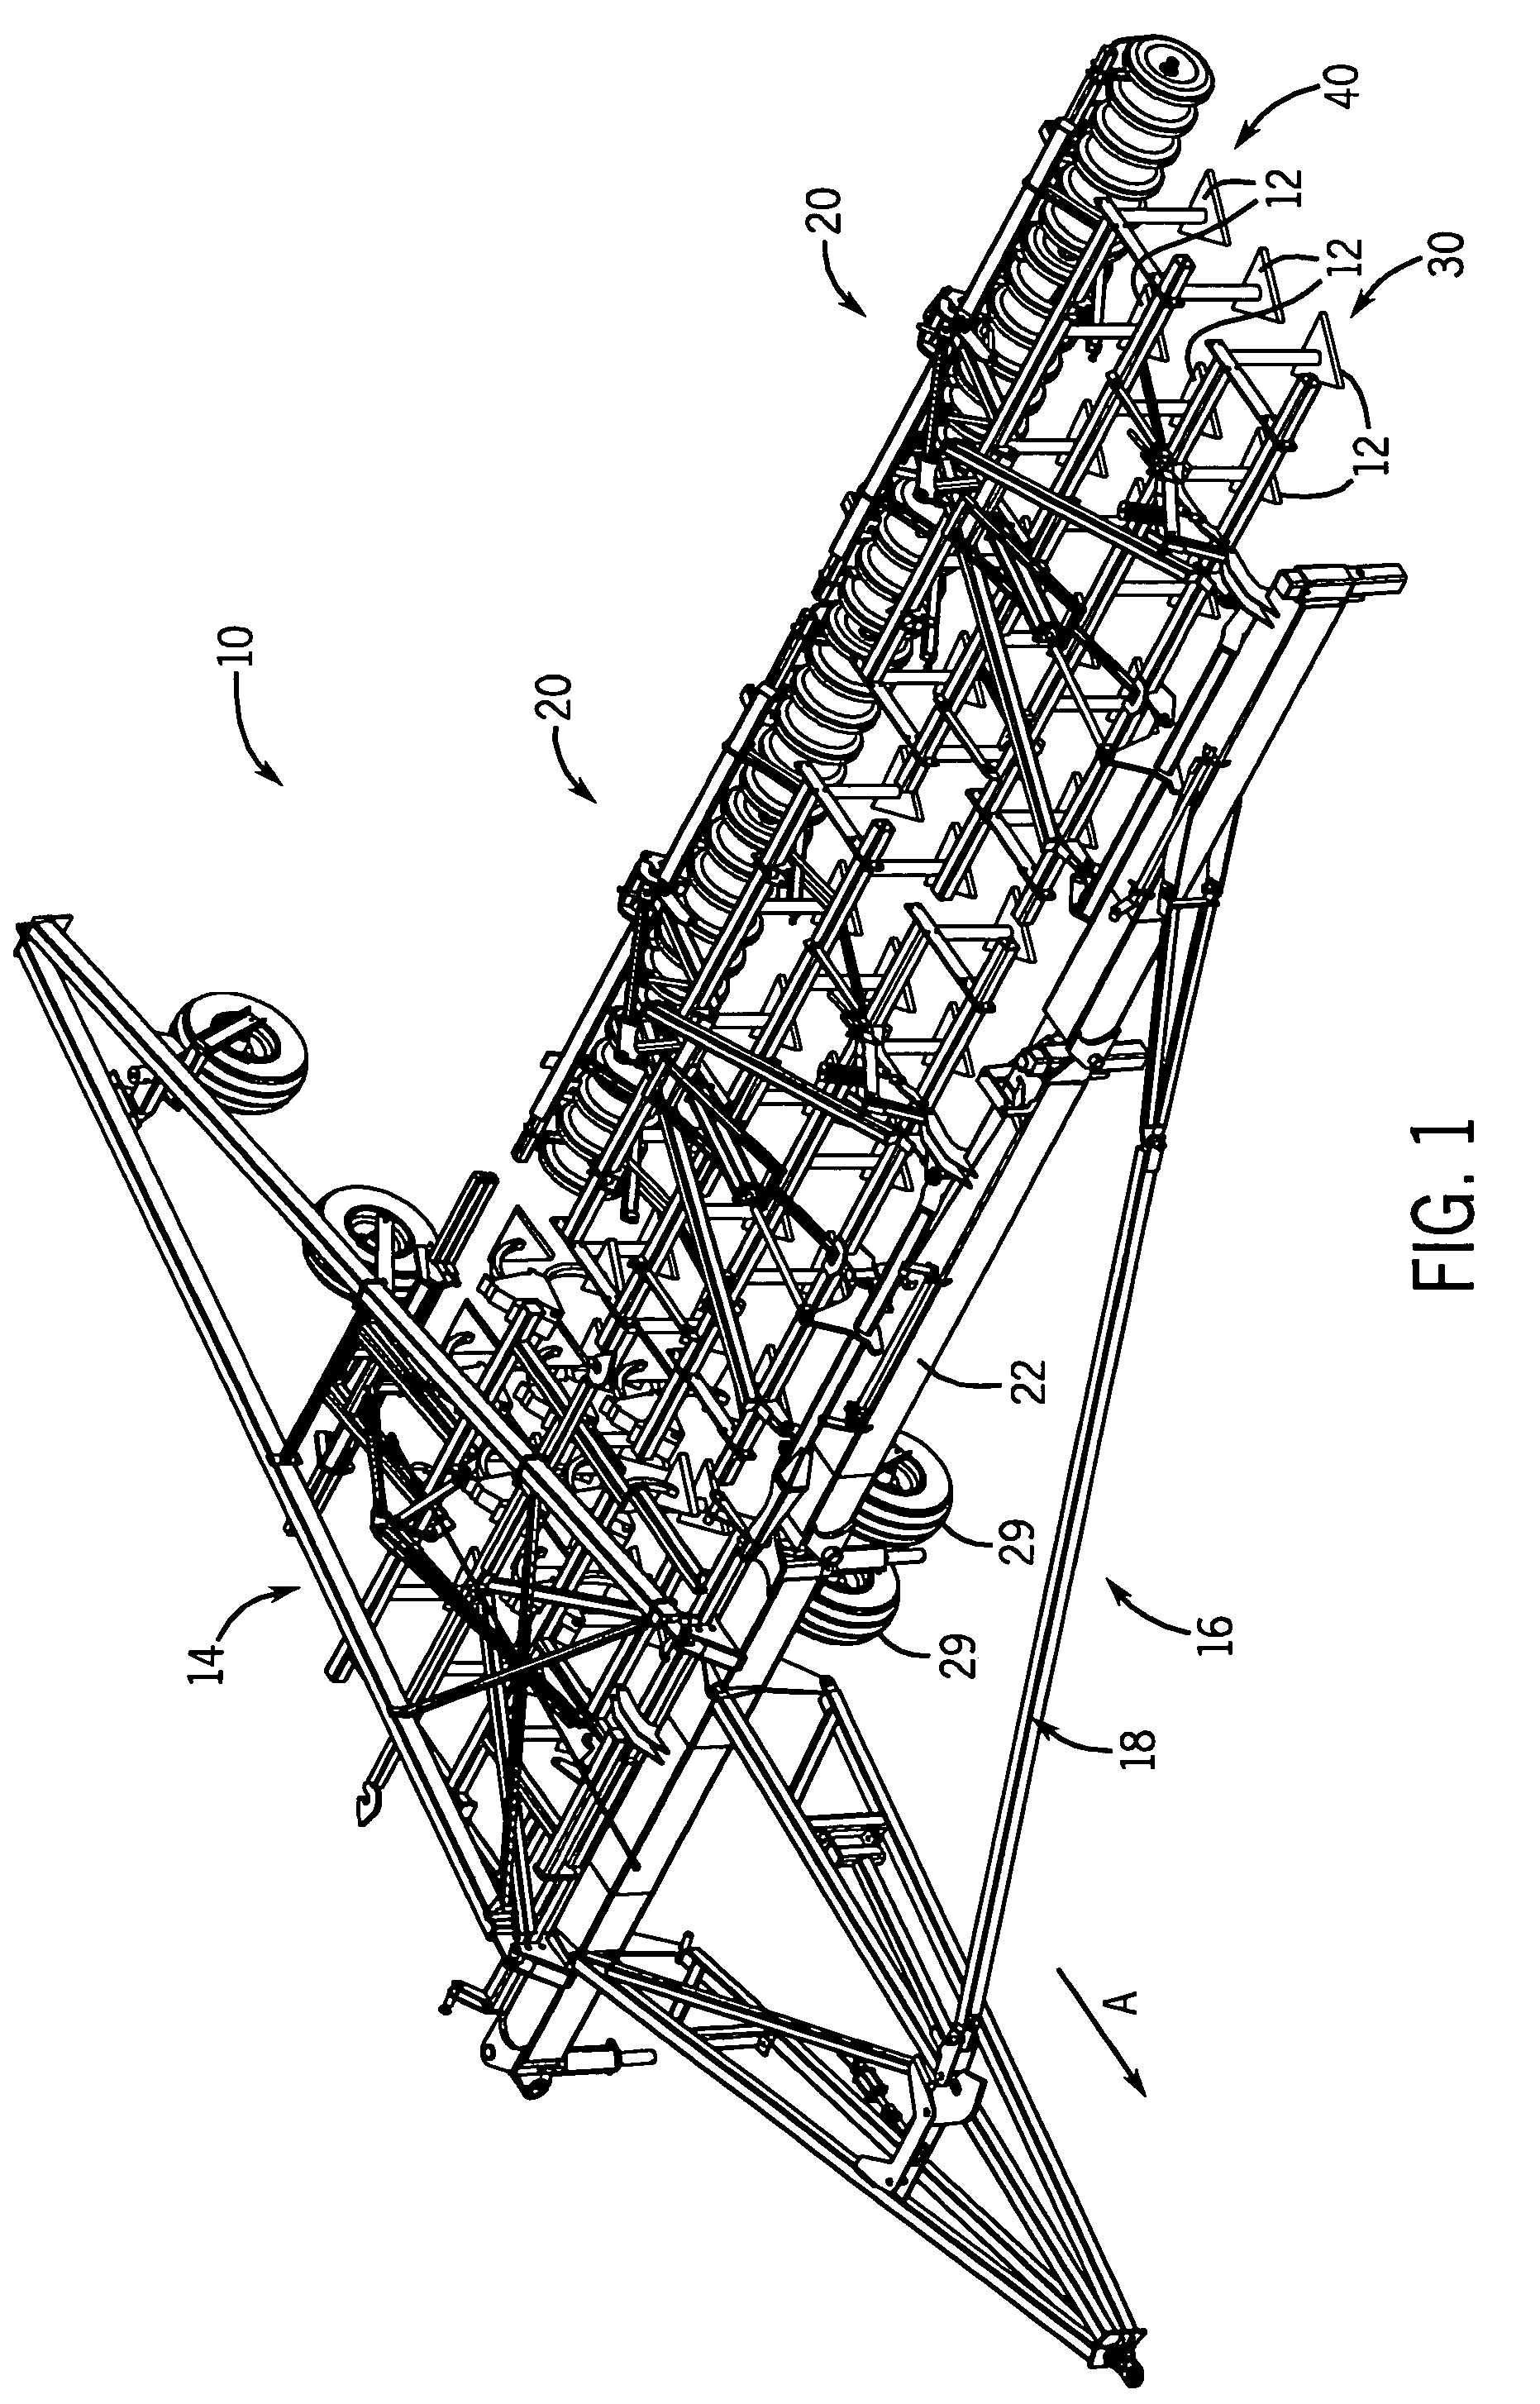 Tillage apparatus having flexible frame and weight distribution system